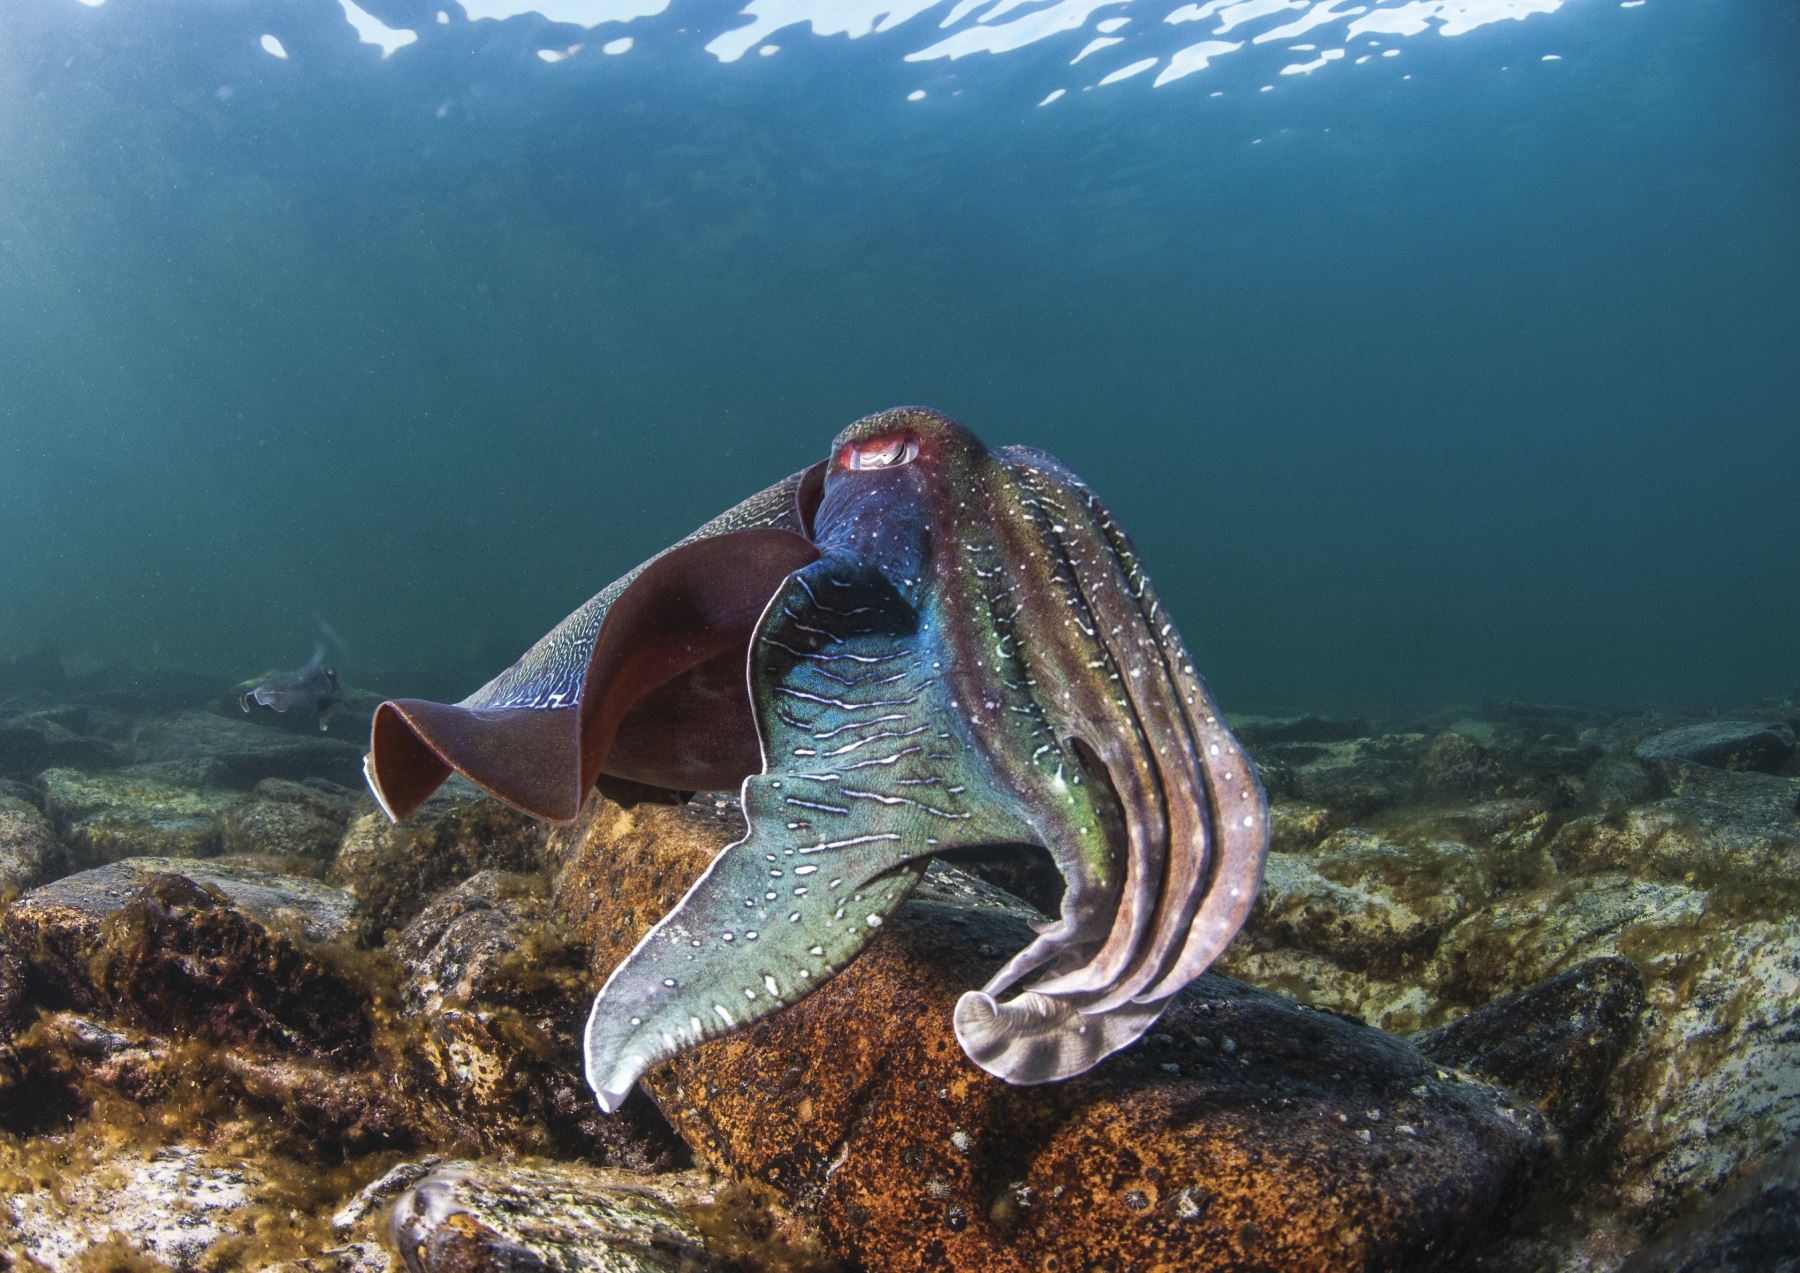 Cuttlefish at Stony Point, Whyalla. Photo: Carl Charter.